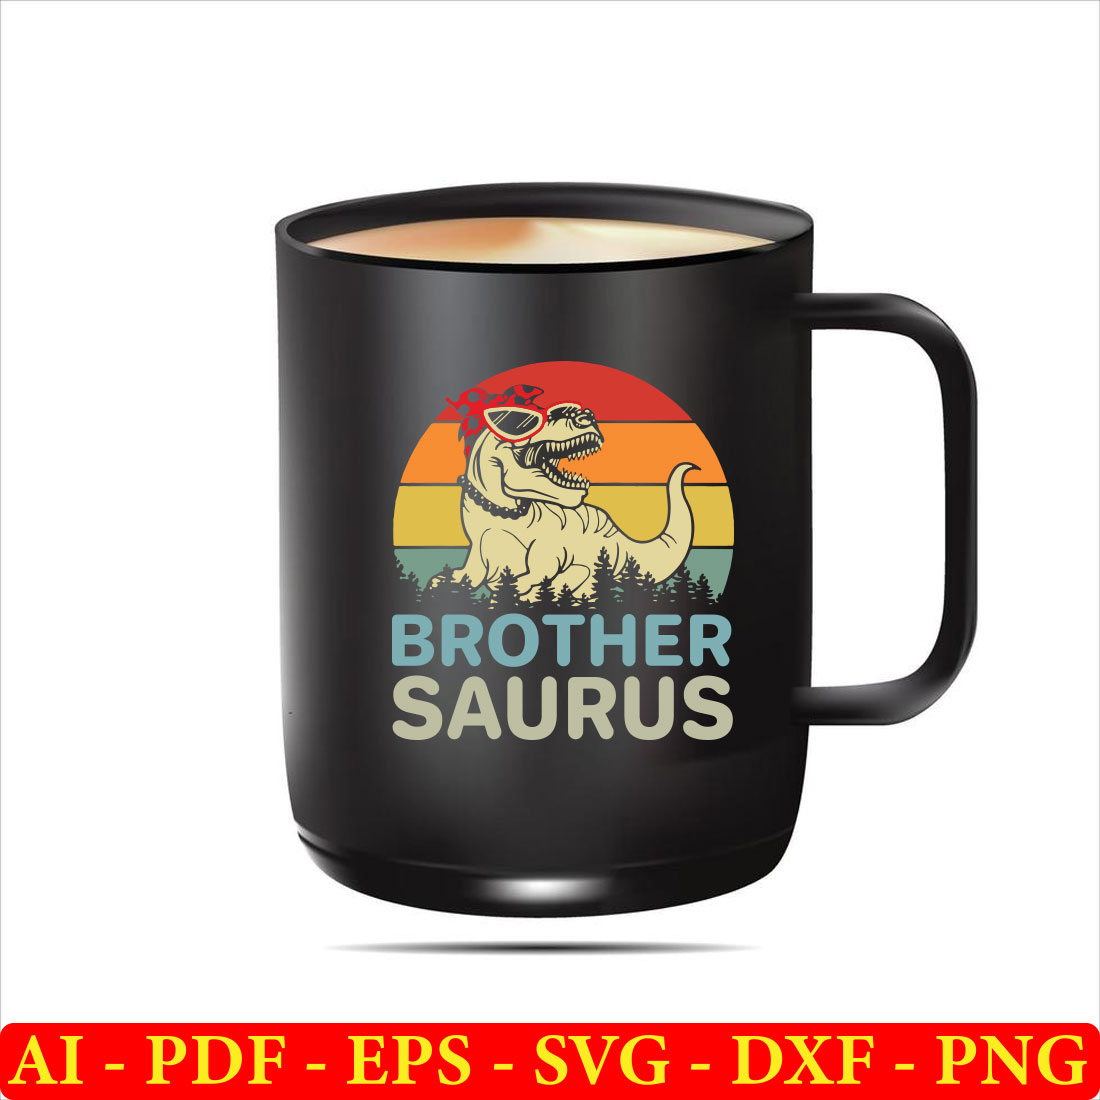 Black coffee mug with a picture of a dinosaur on it.